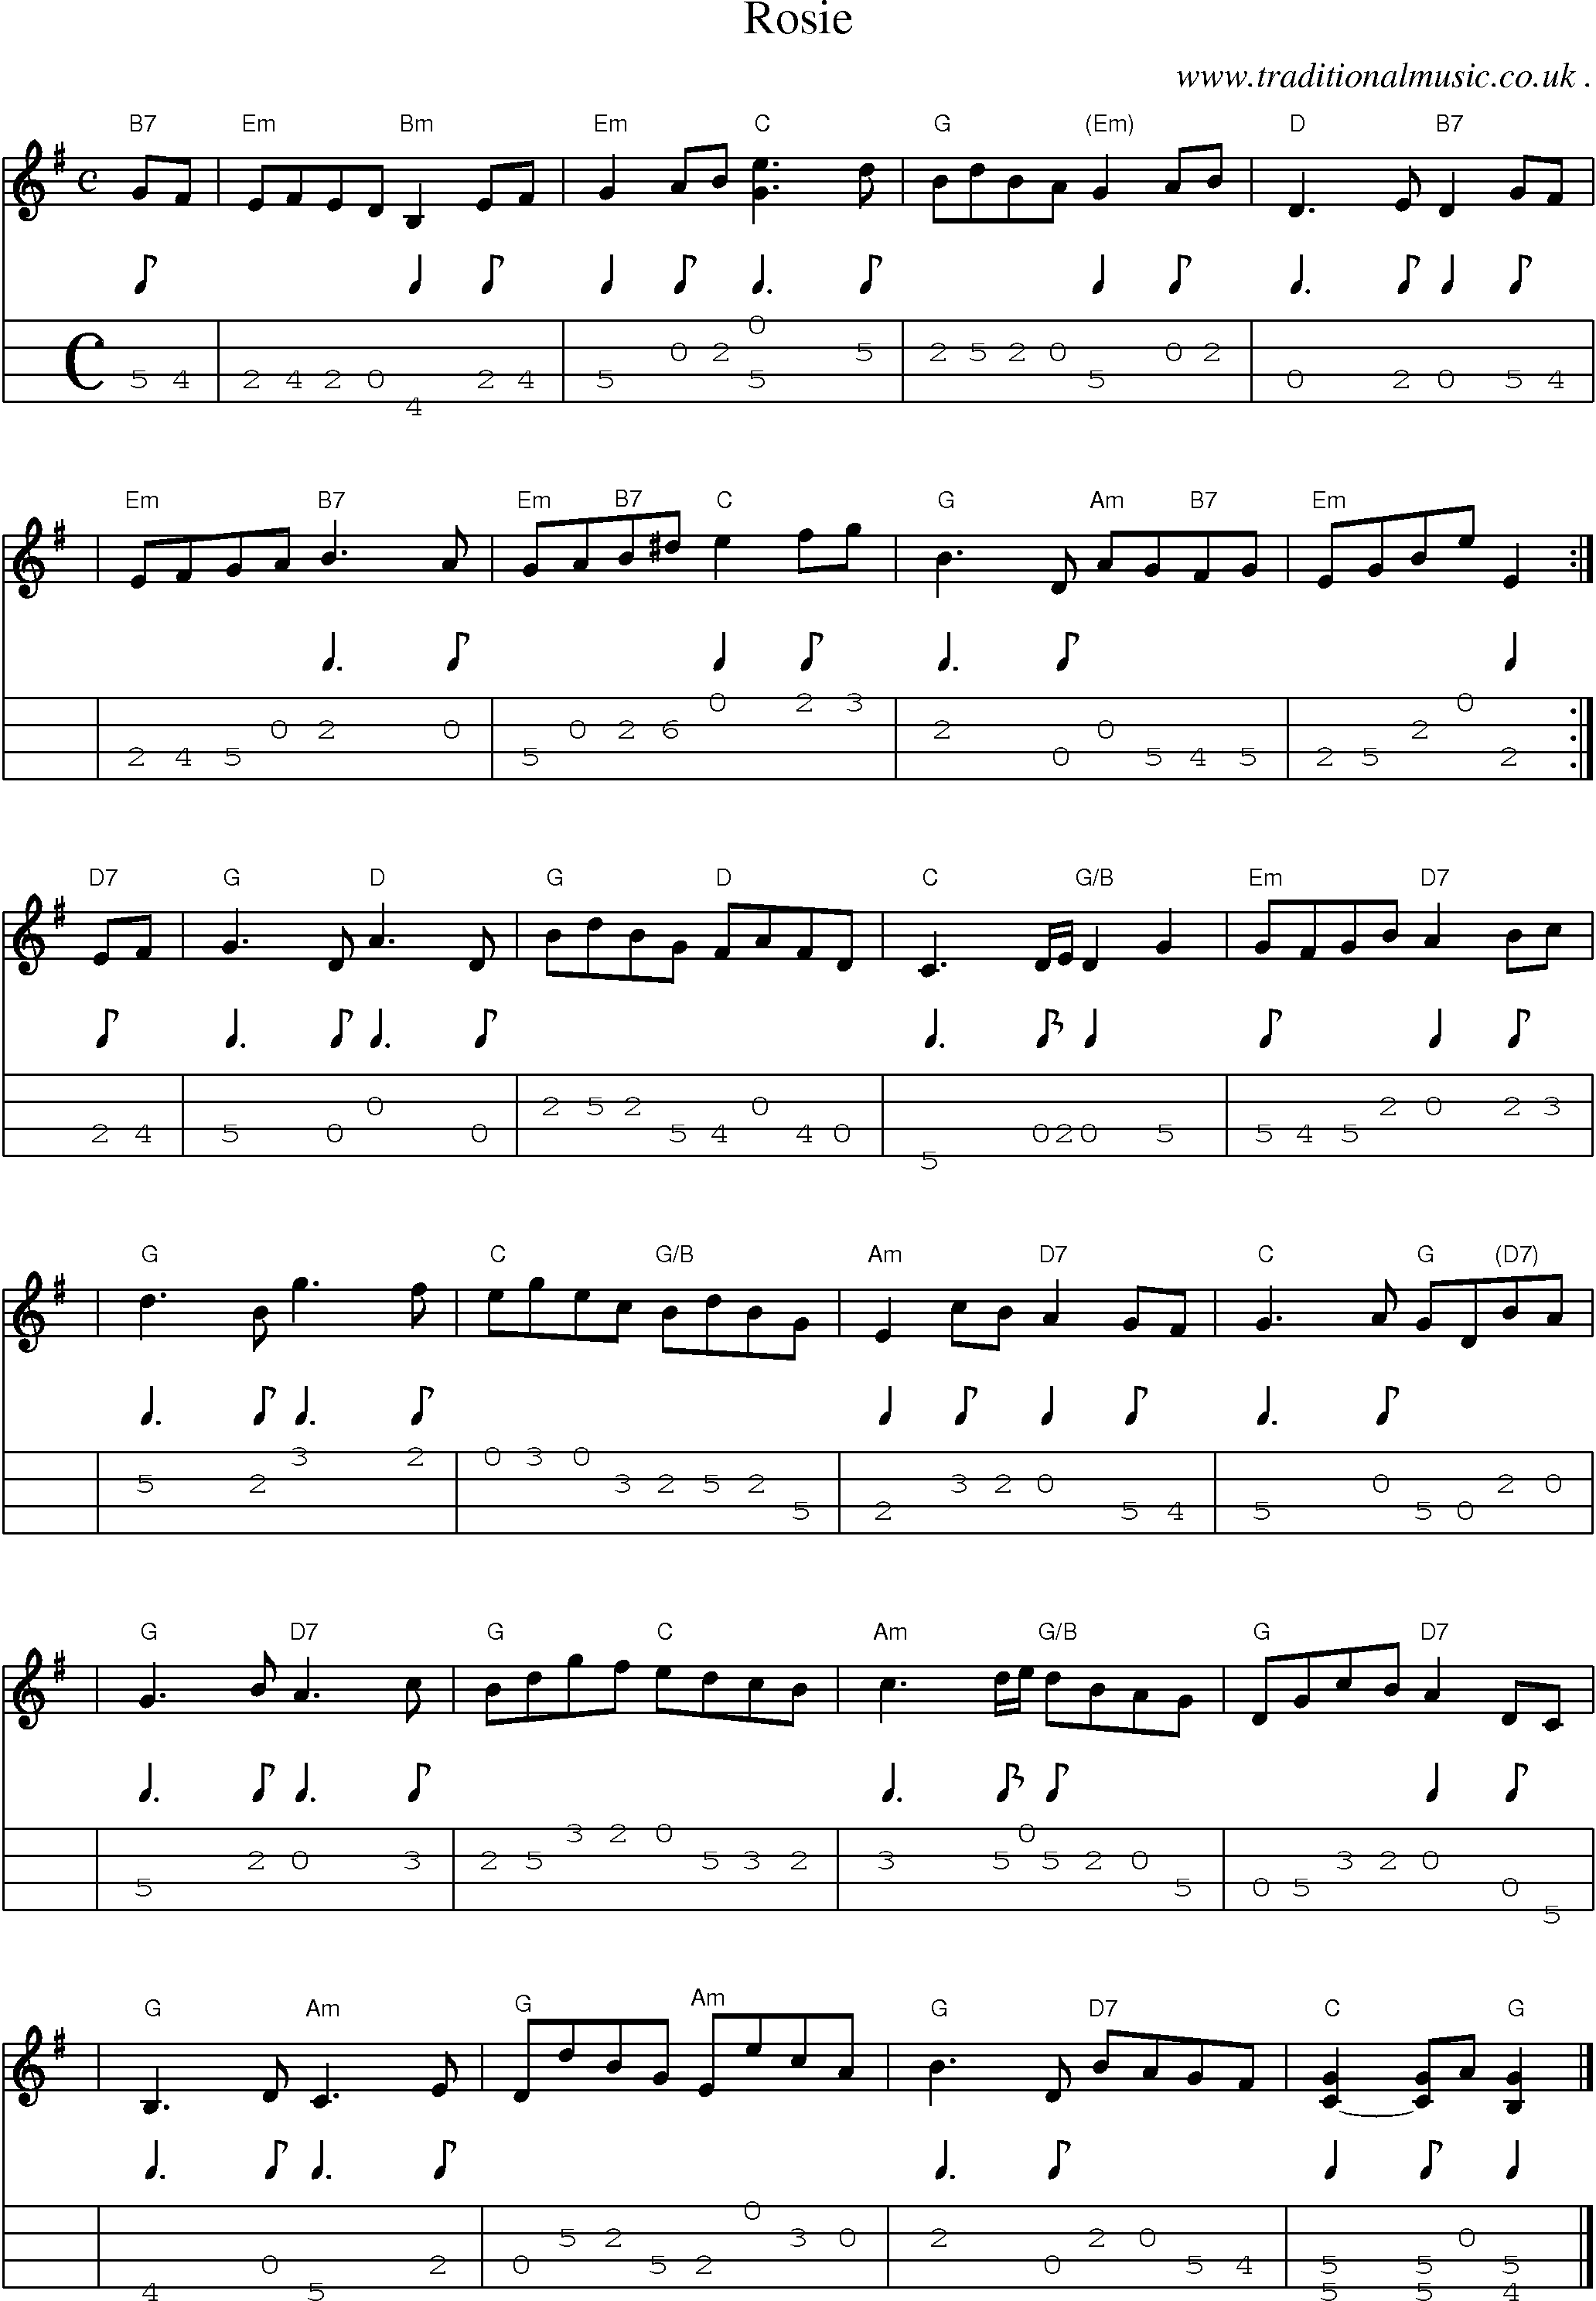 Sheet-music  score, Chords and Mandolin Tabs for Rosie